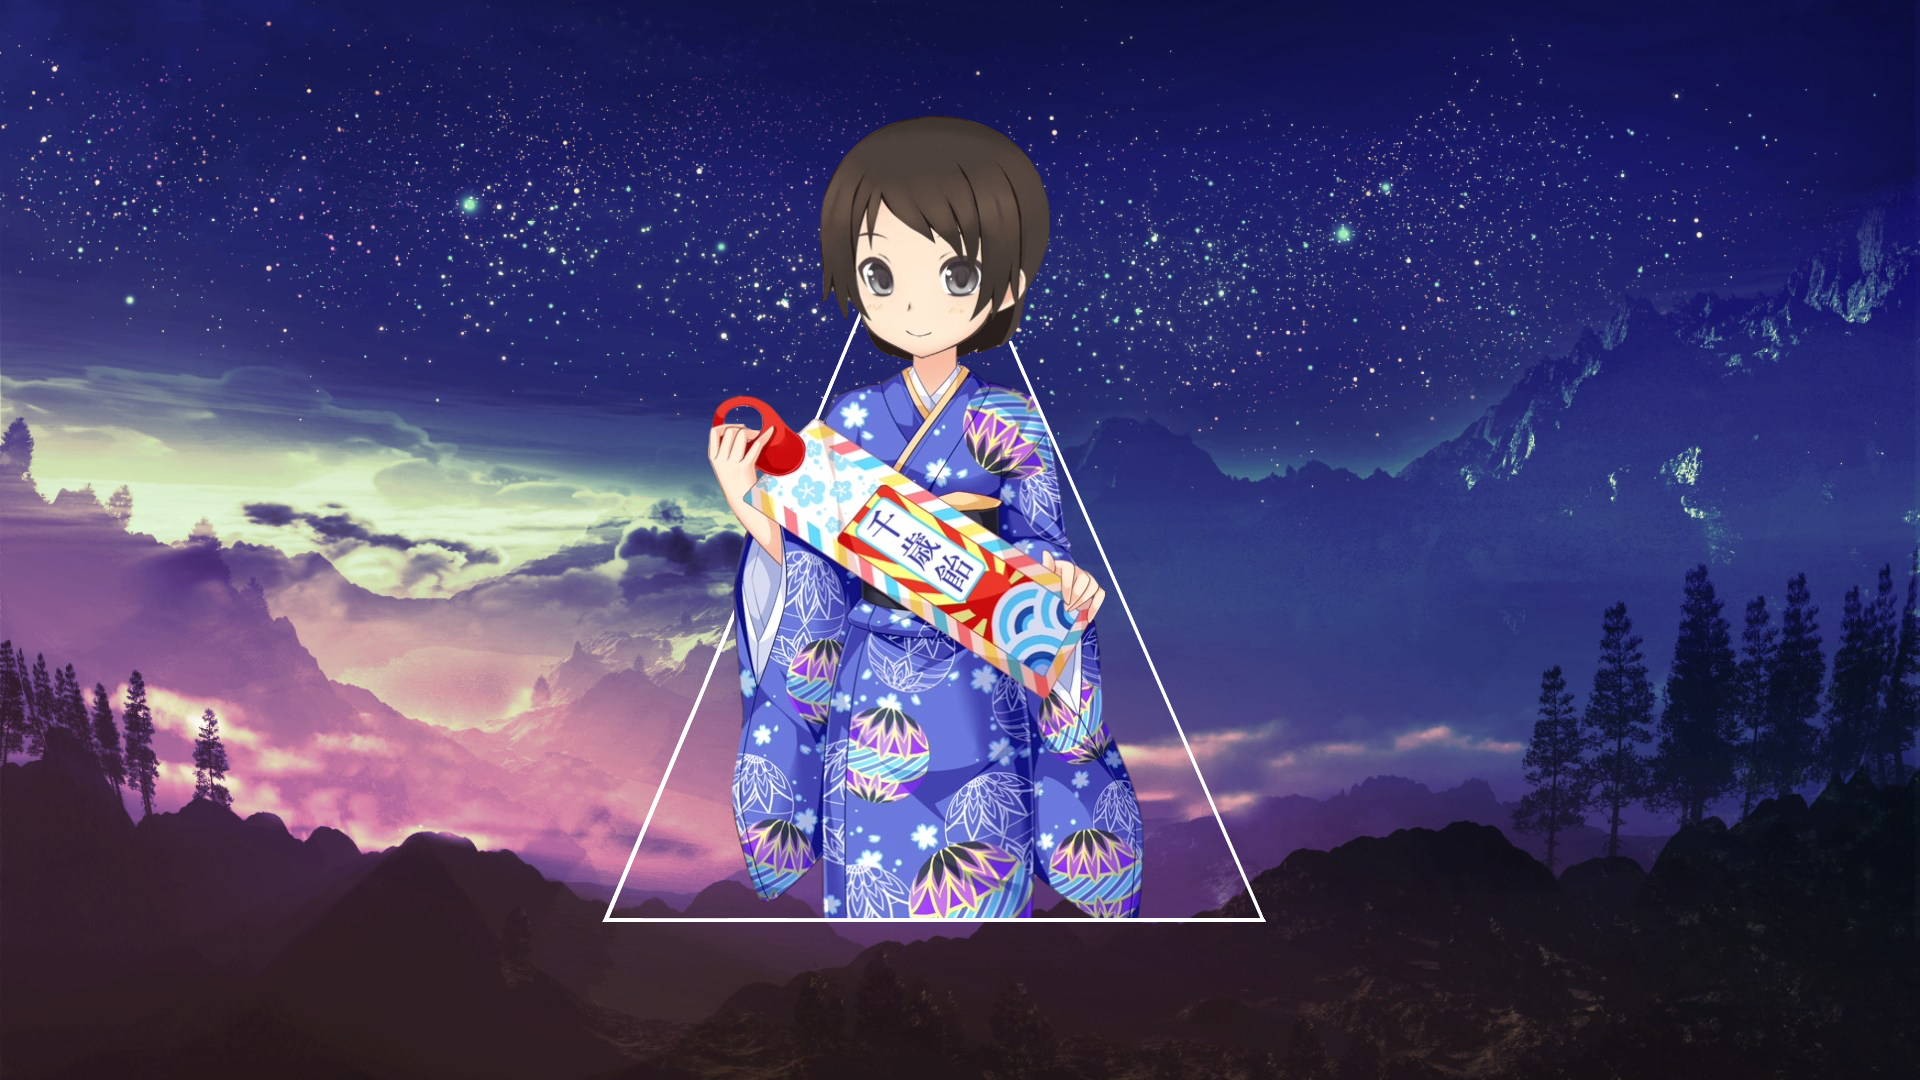 Anime 1920x1080 kimono purple background anime girls anime short hair brunette picture-in-picture